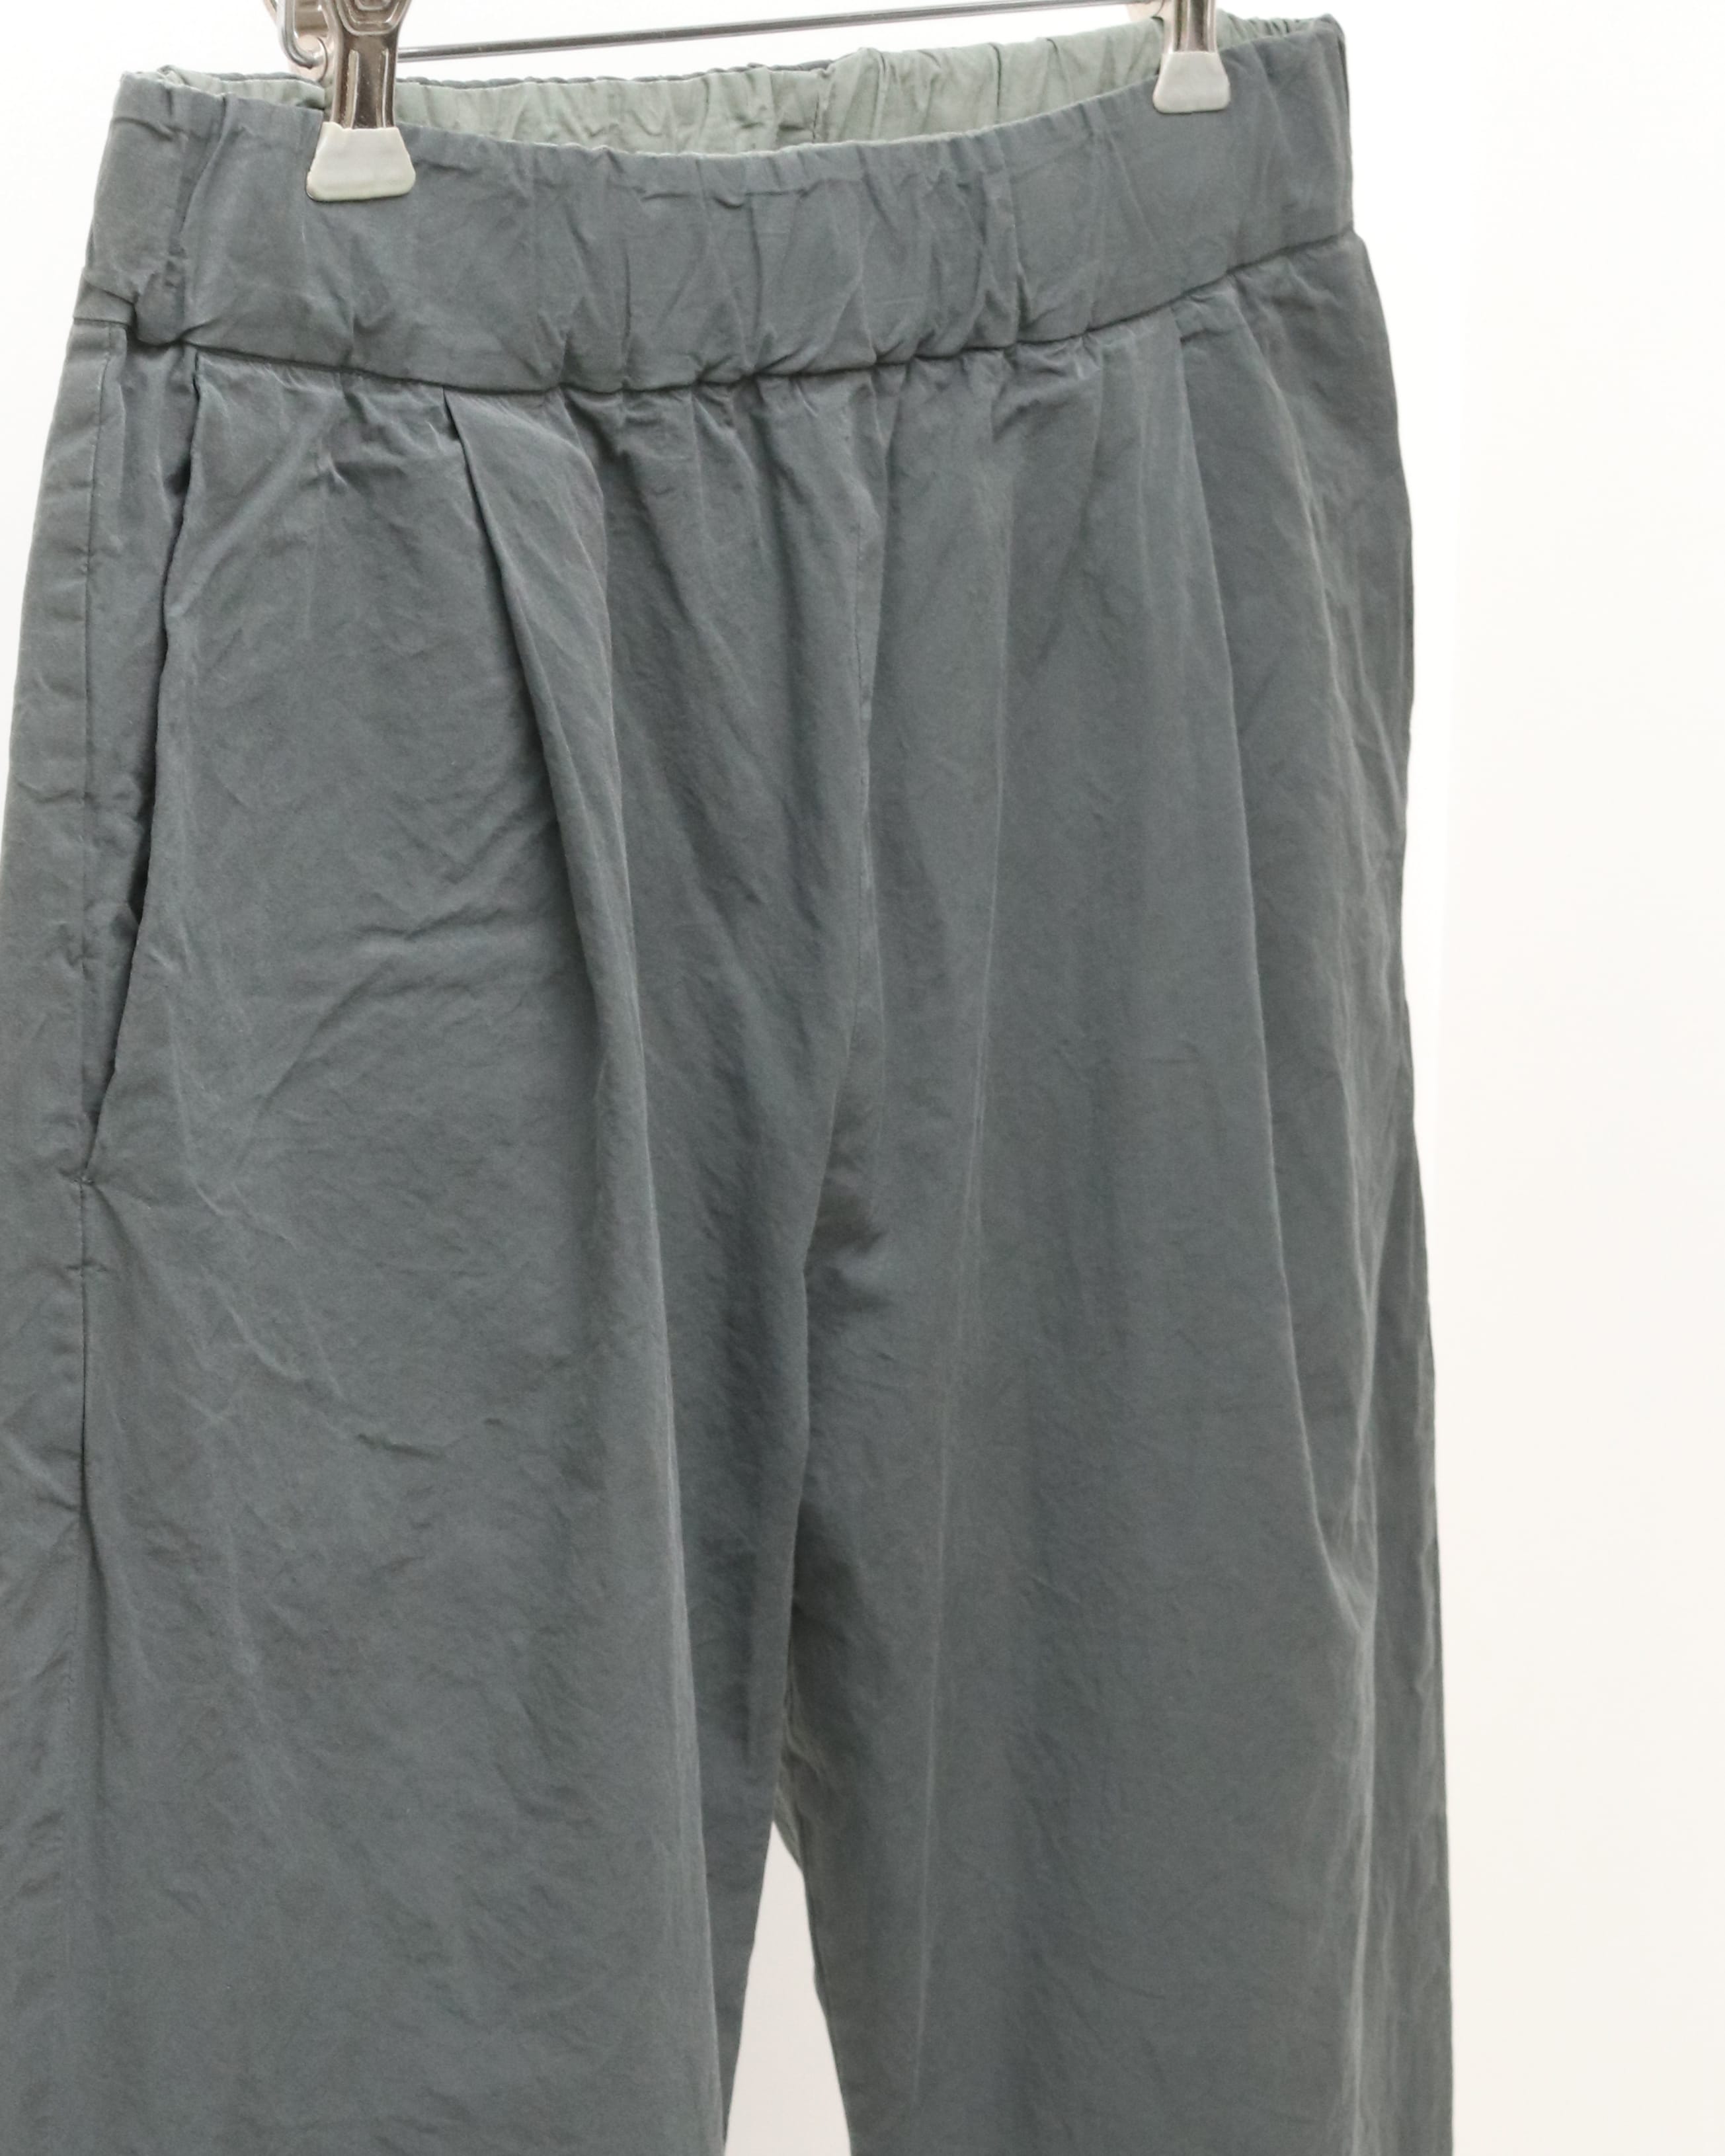 VERGER REVERSIBLE PANT – TIME AFTER TIME